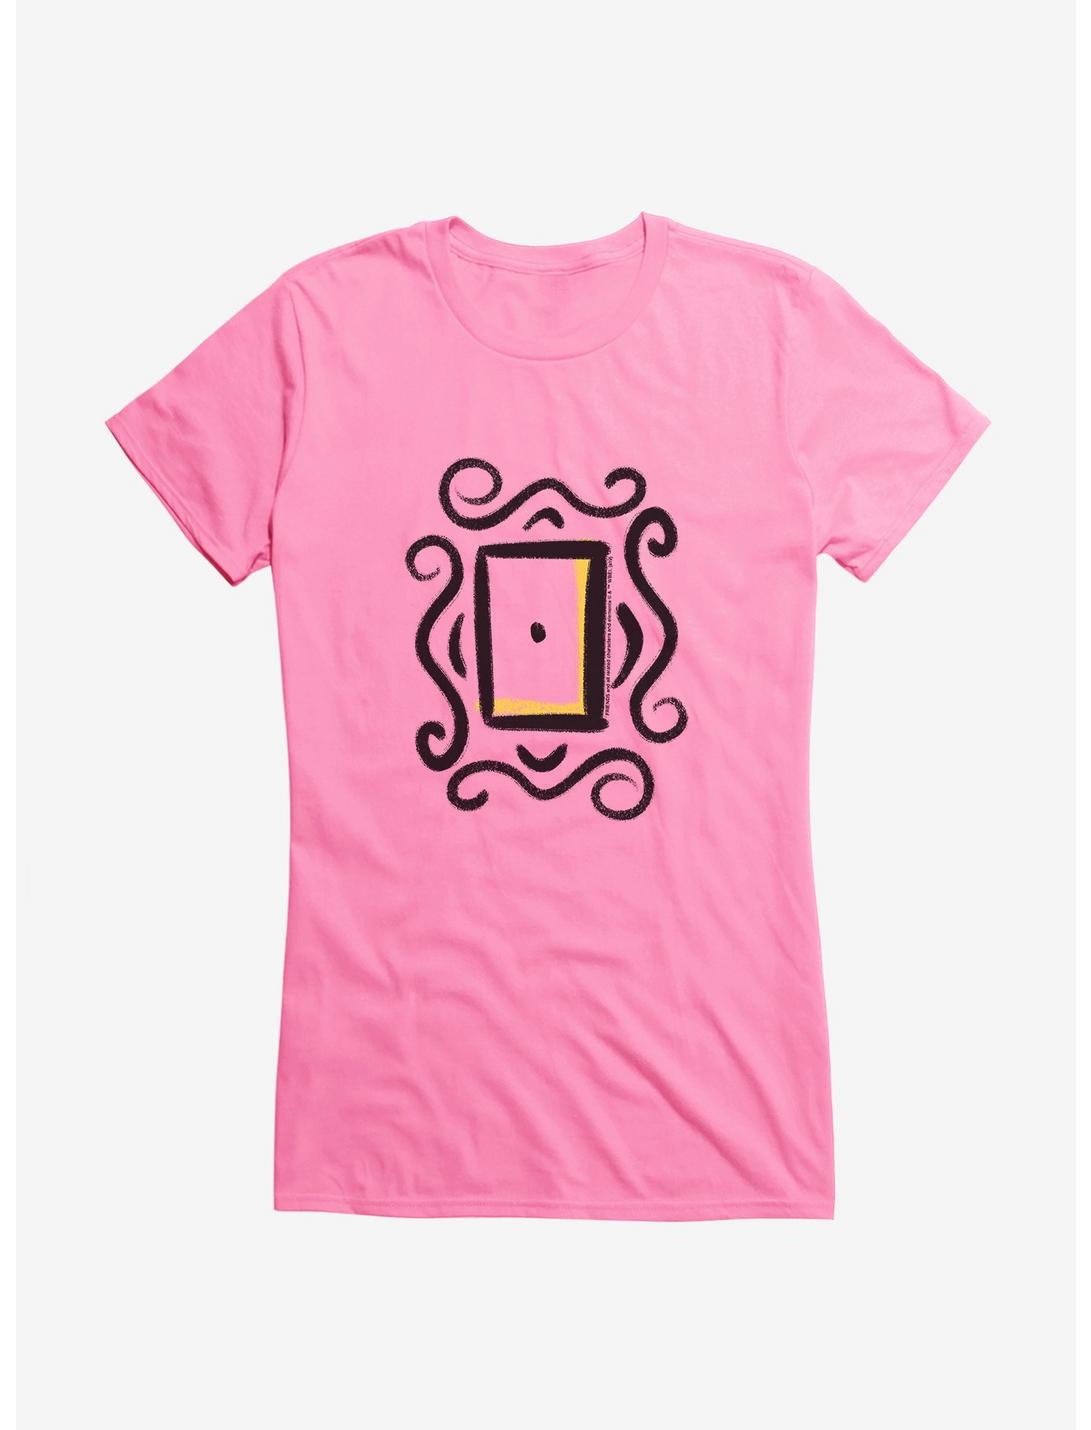 Friends Frame Icon Girls T-Shirt, CHARITY PINK, hi-res